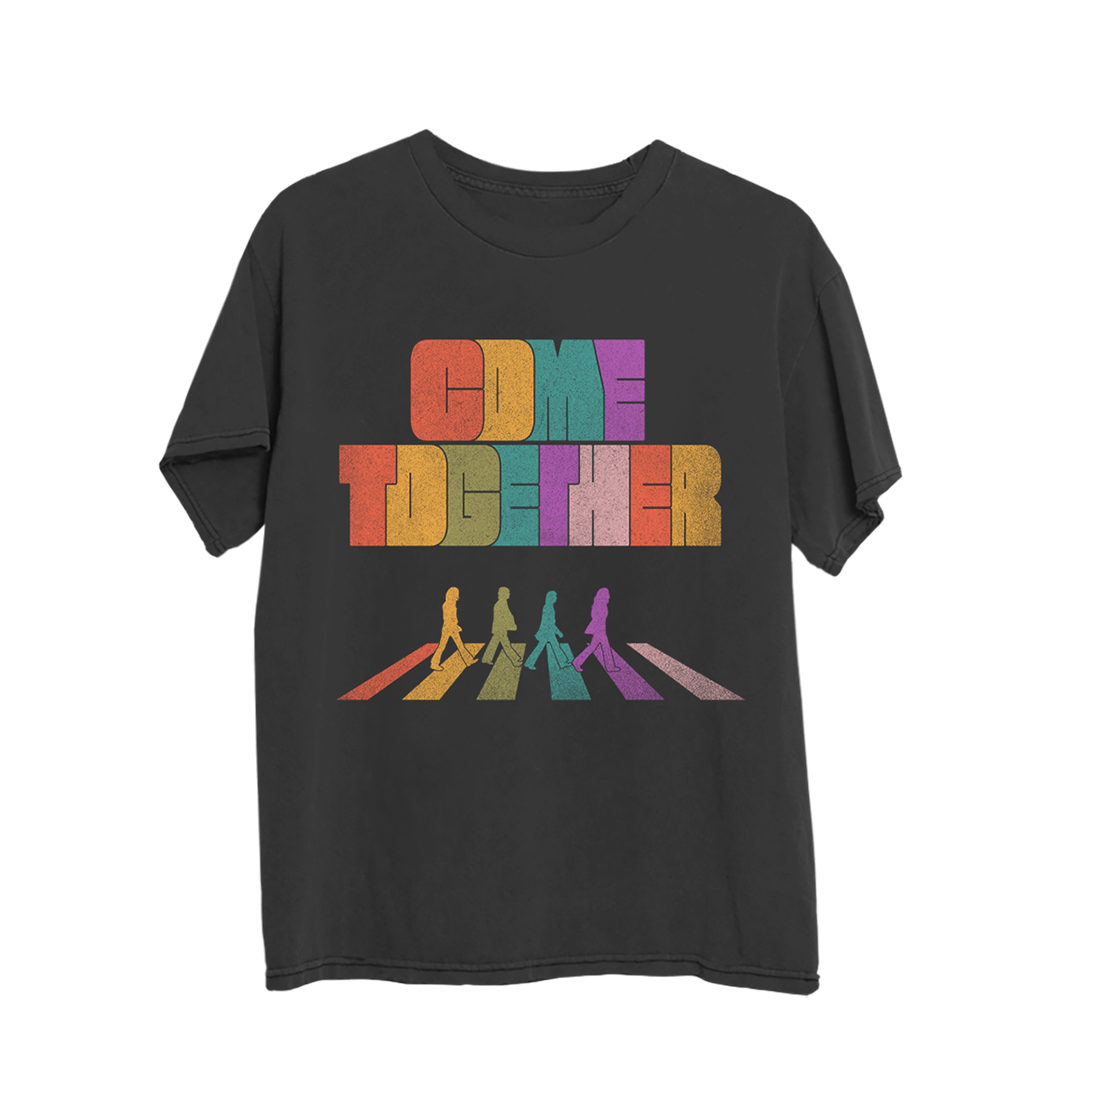 The Beatles - Come Together Black T-Shirt